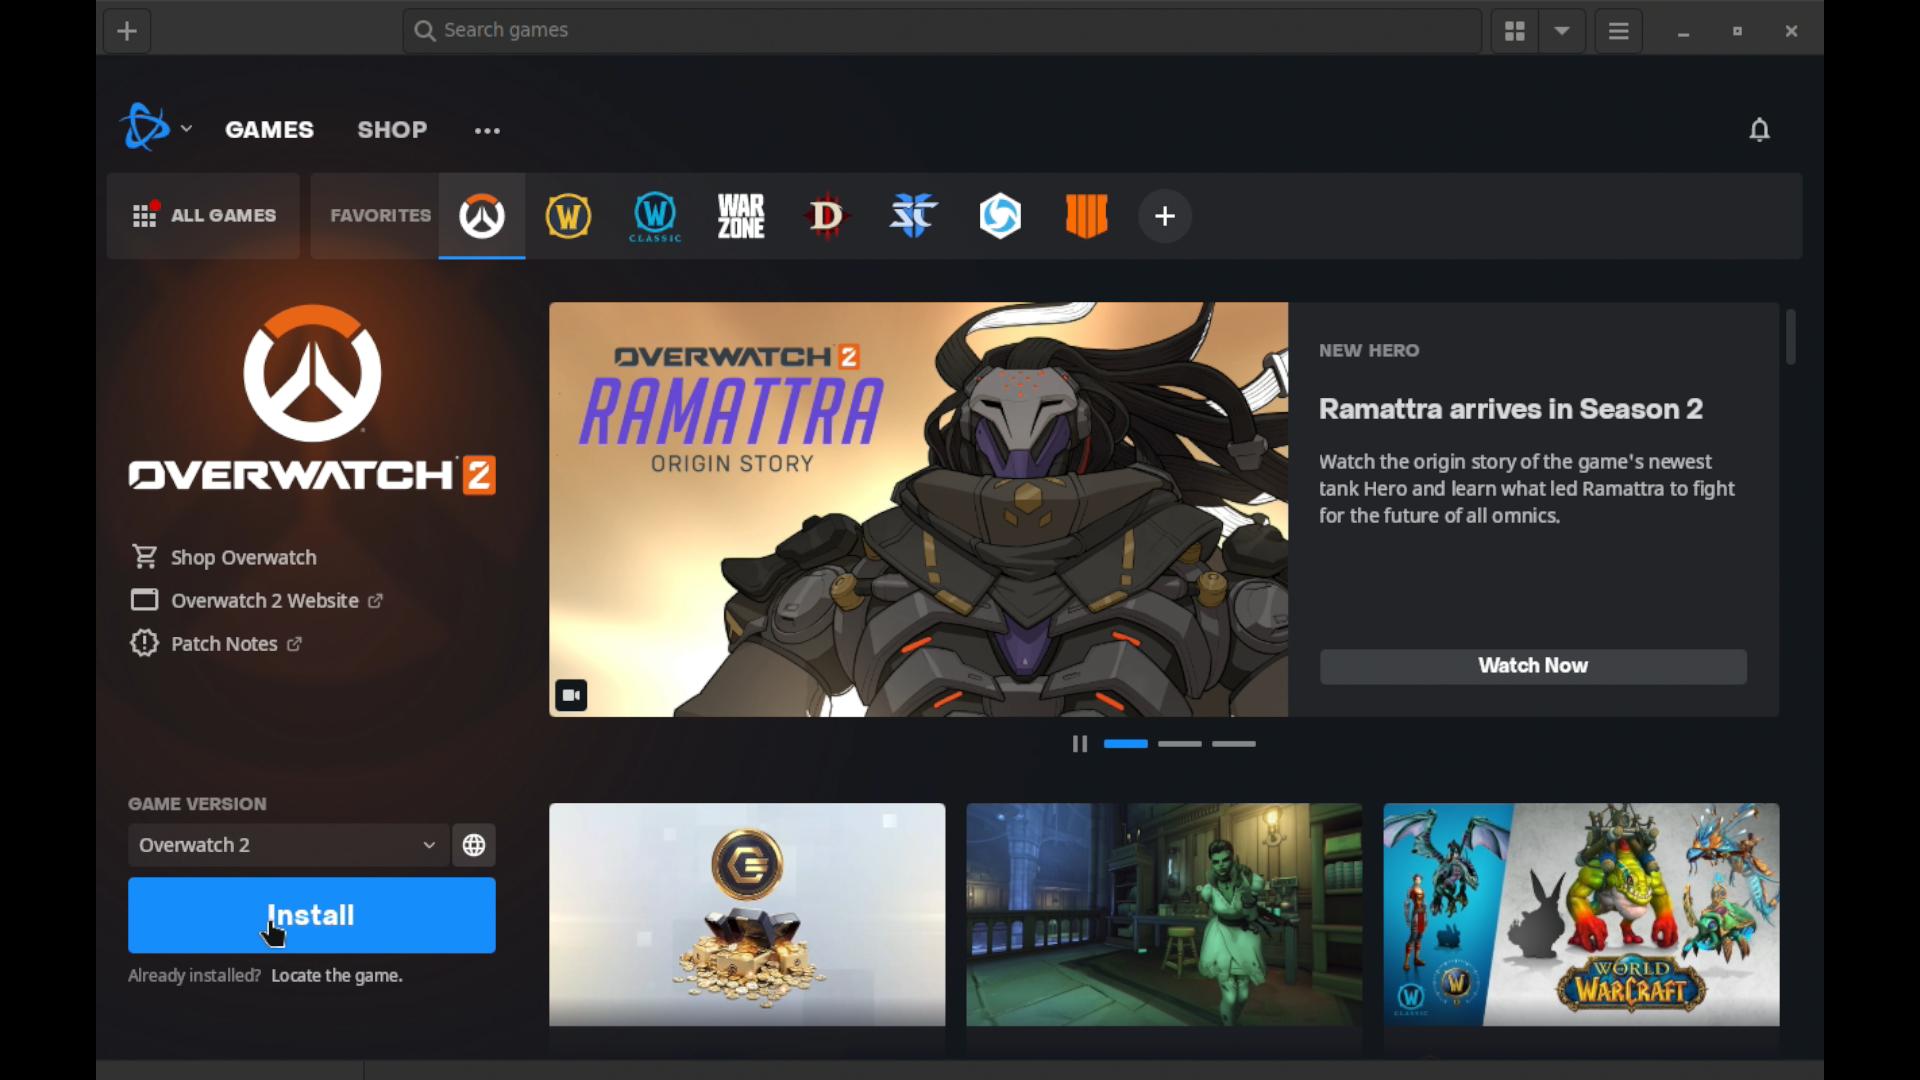 Is Overwatch 2 free to play? How to download Overwatch 2?